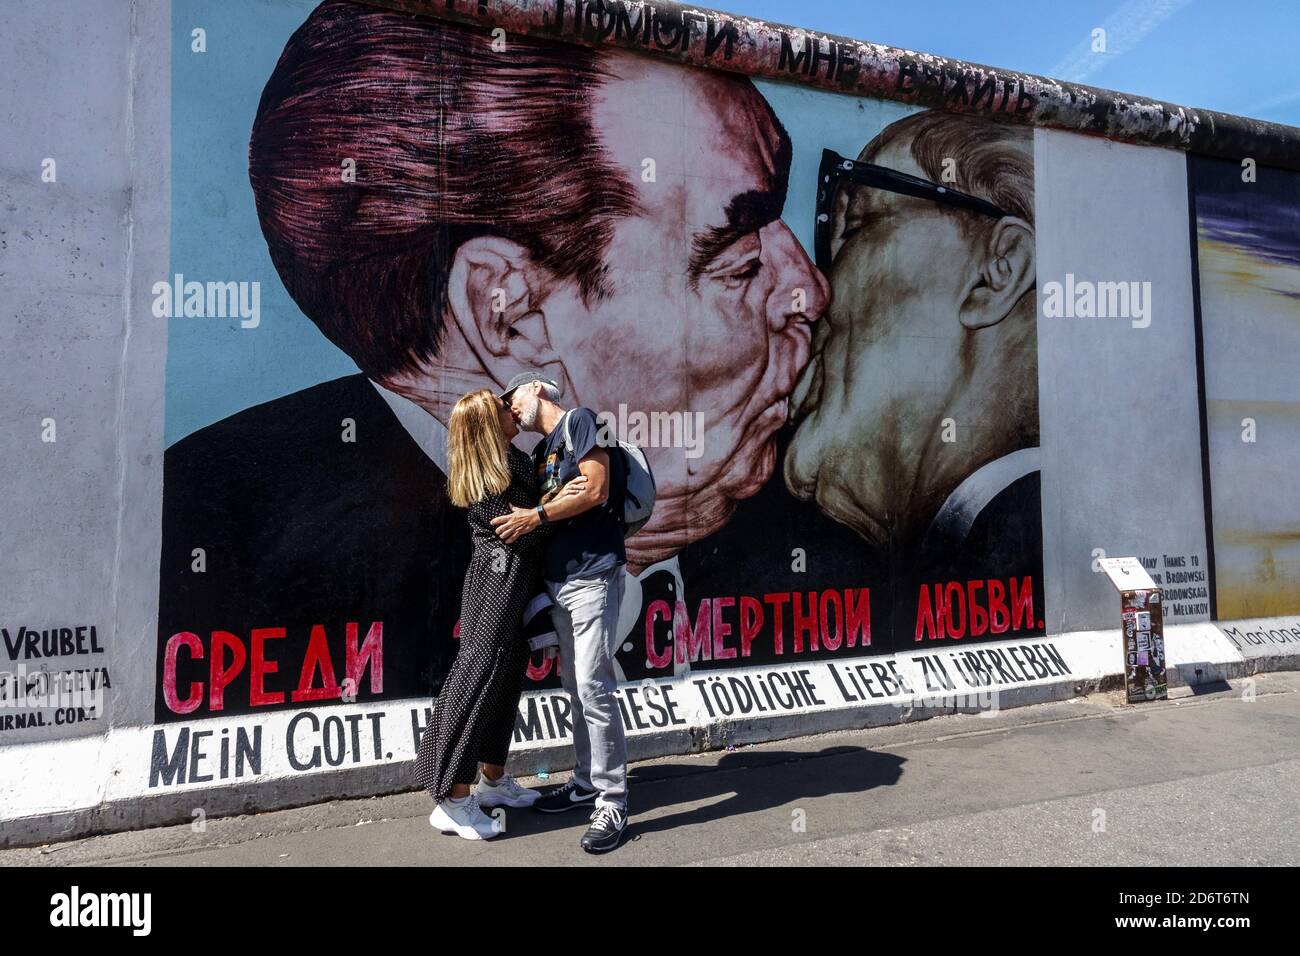 Kissing at Berlin wall graffiti on the original section of Berlin Wall at the East Side Gallery Berlin Friedrichshain Germany city street art Stock Photo